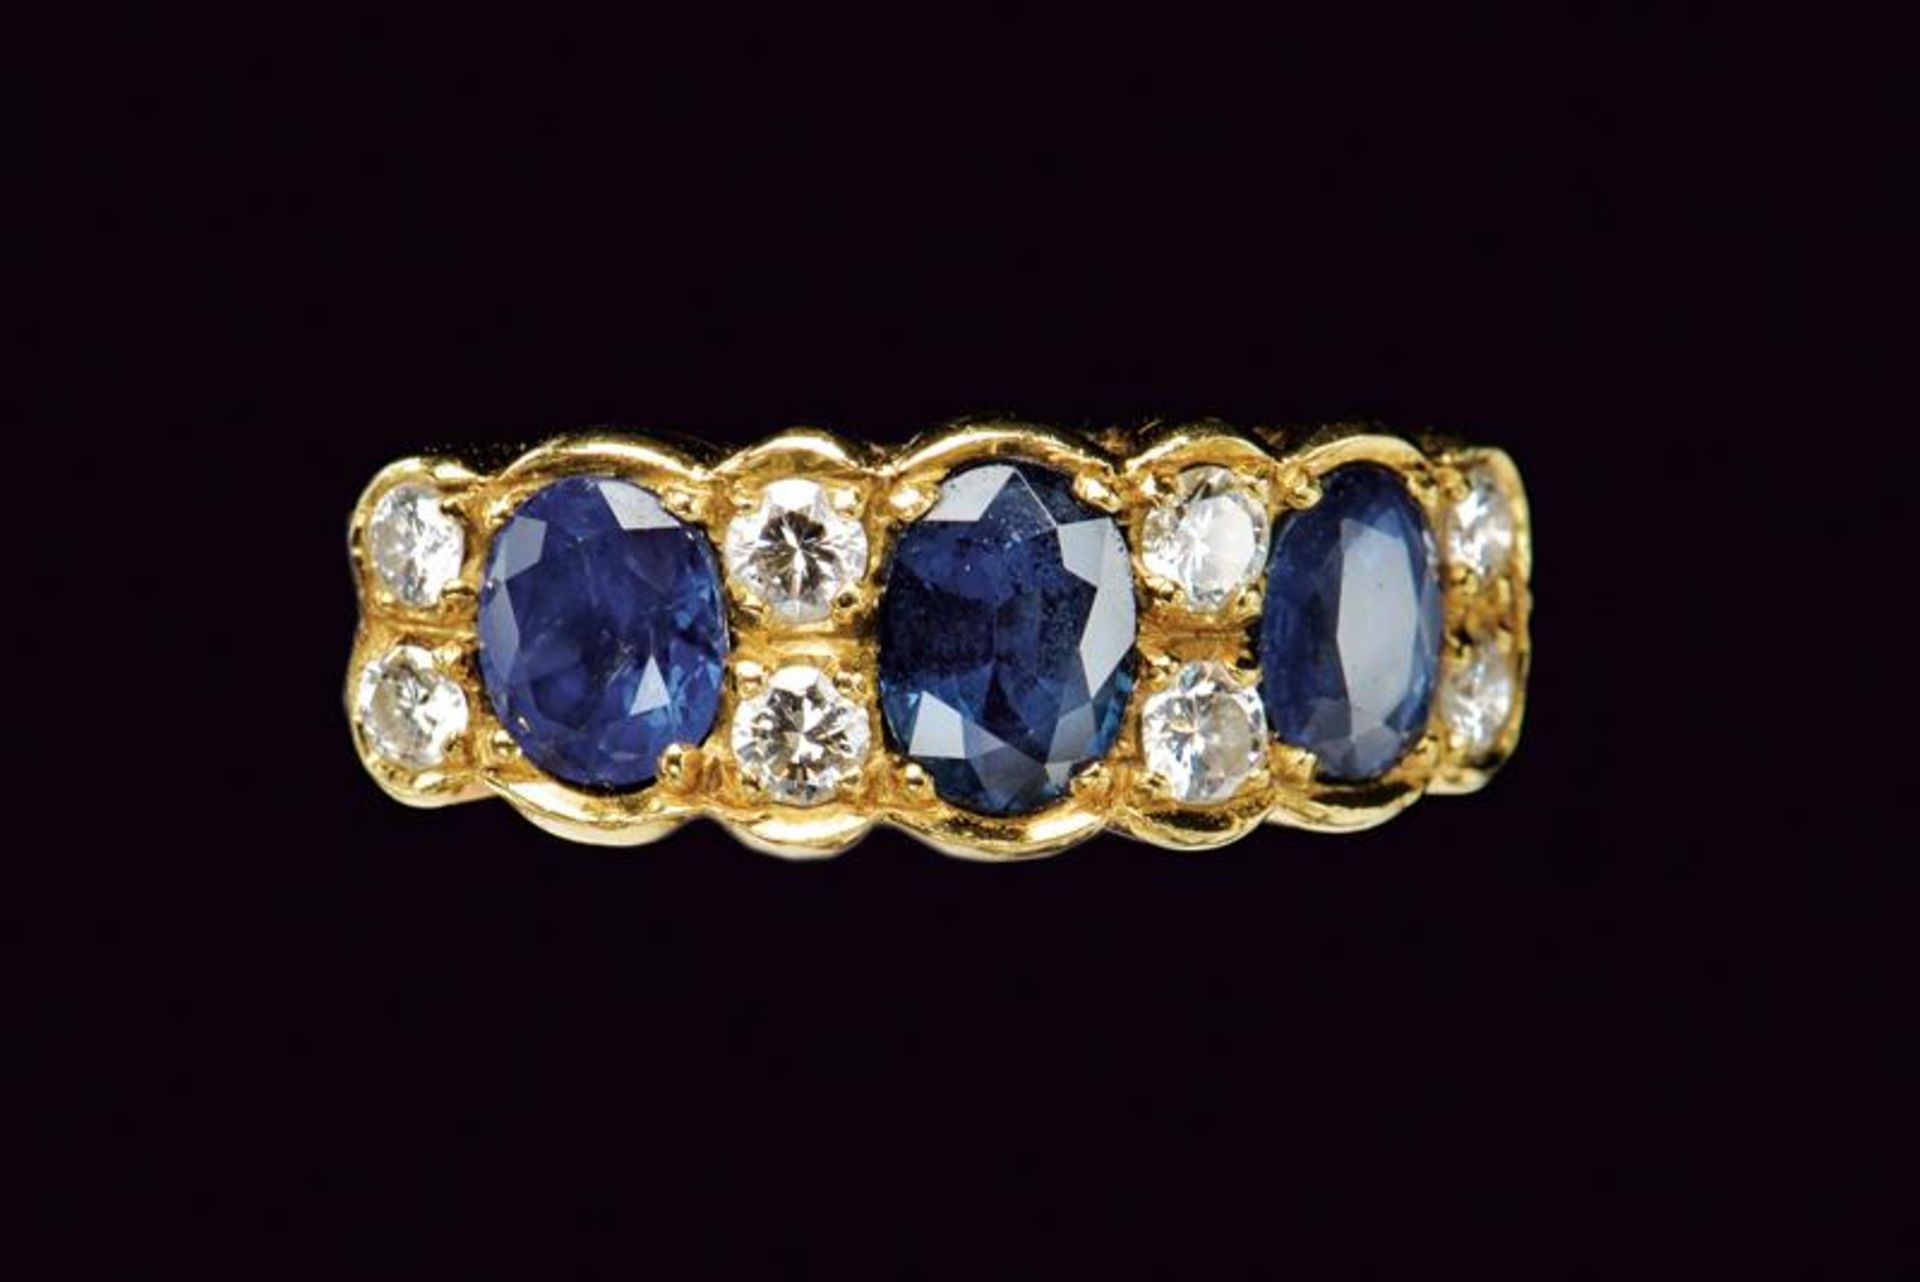 Diamond and sapphire gold band ring - Image 2 of 3